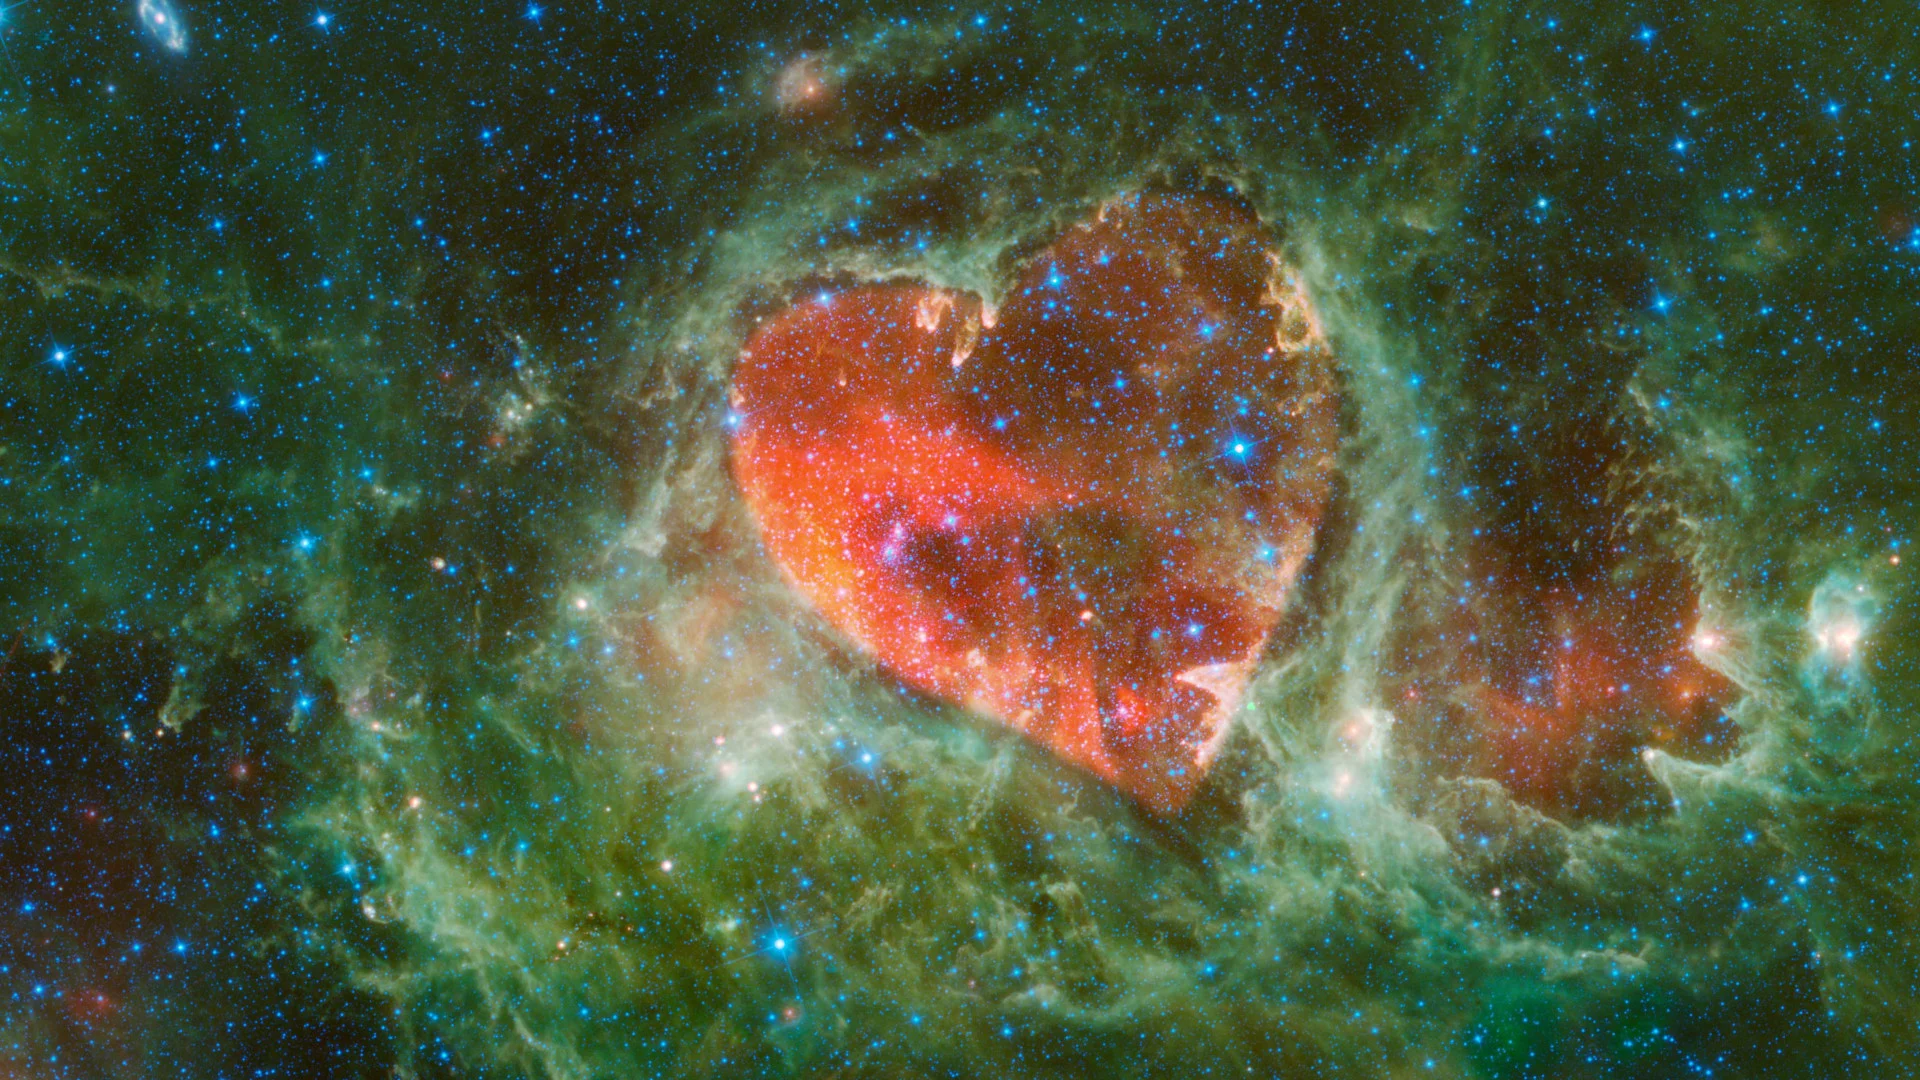 We found love up in space: See the hearts captured in the cosmos